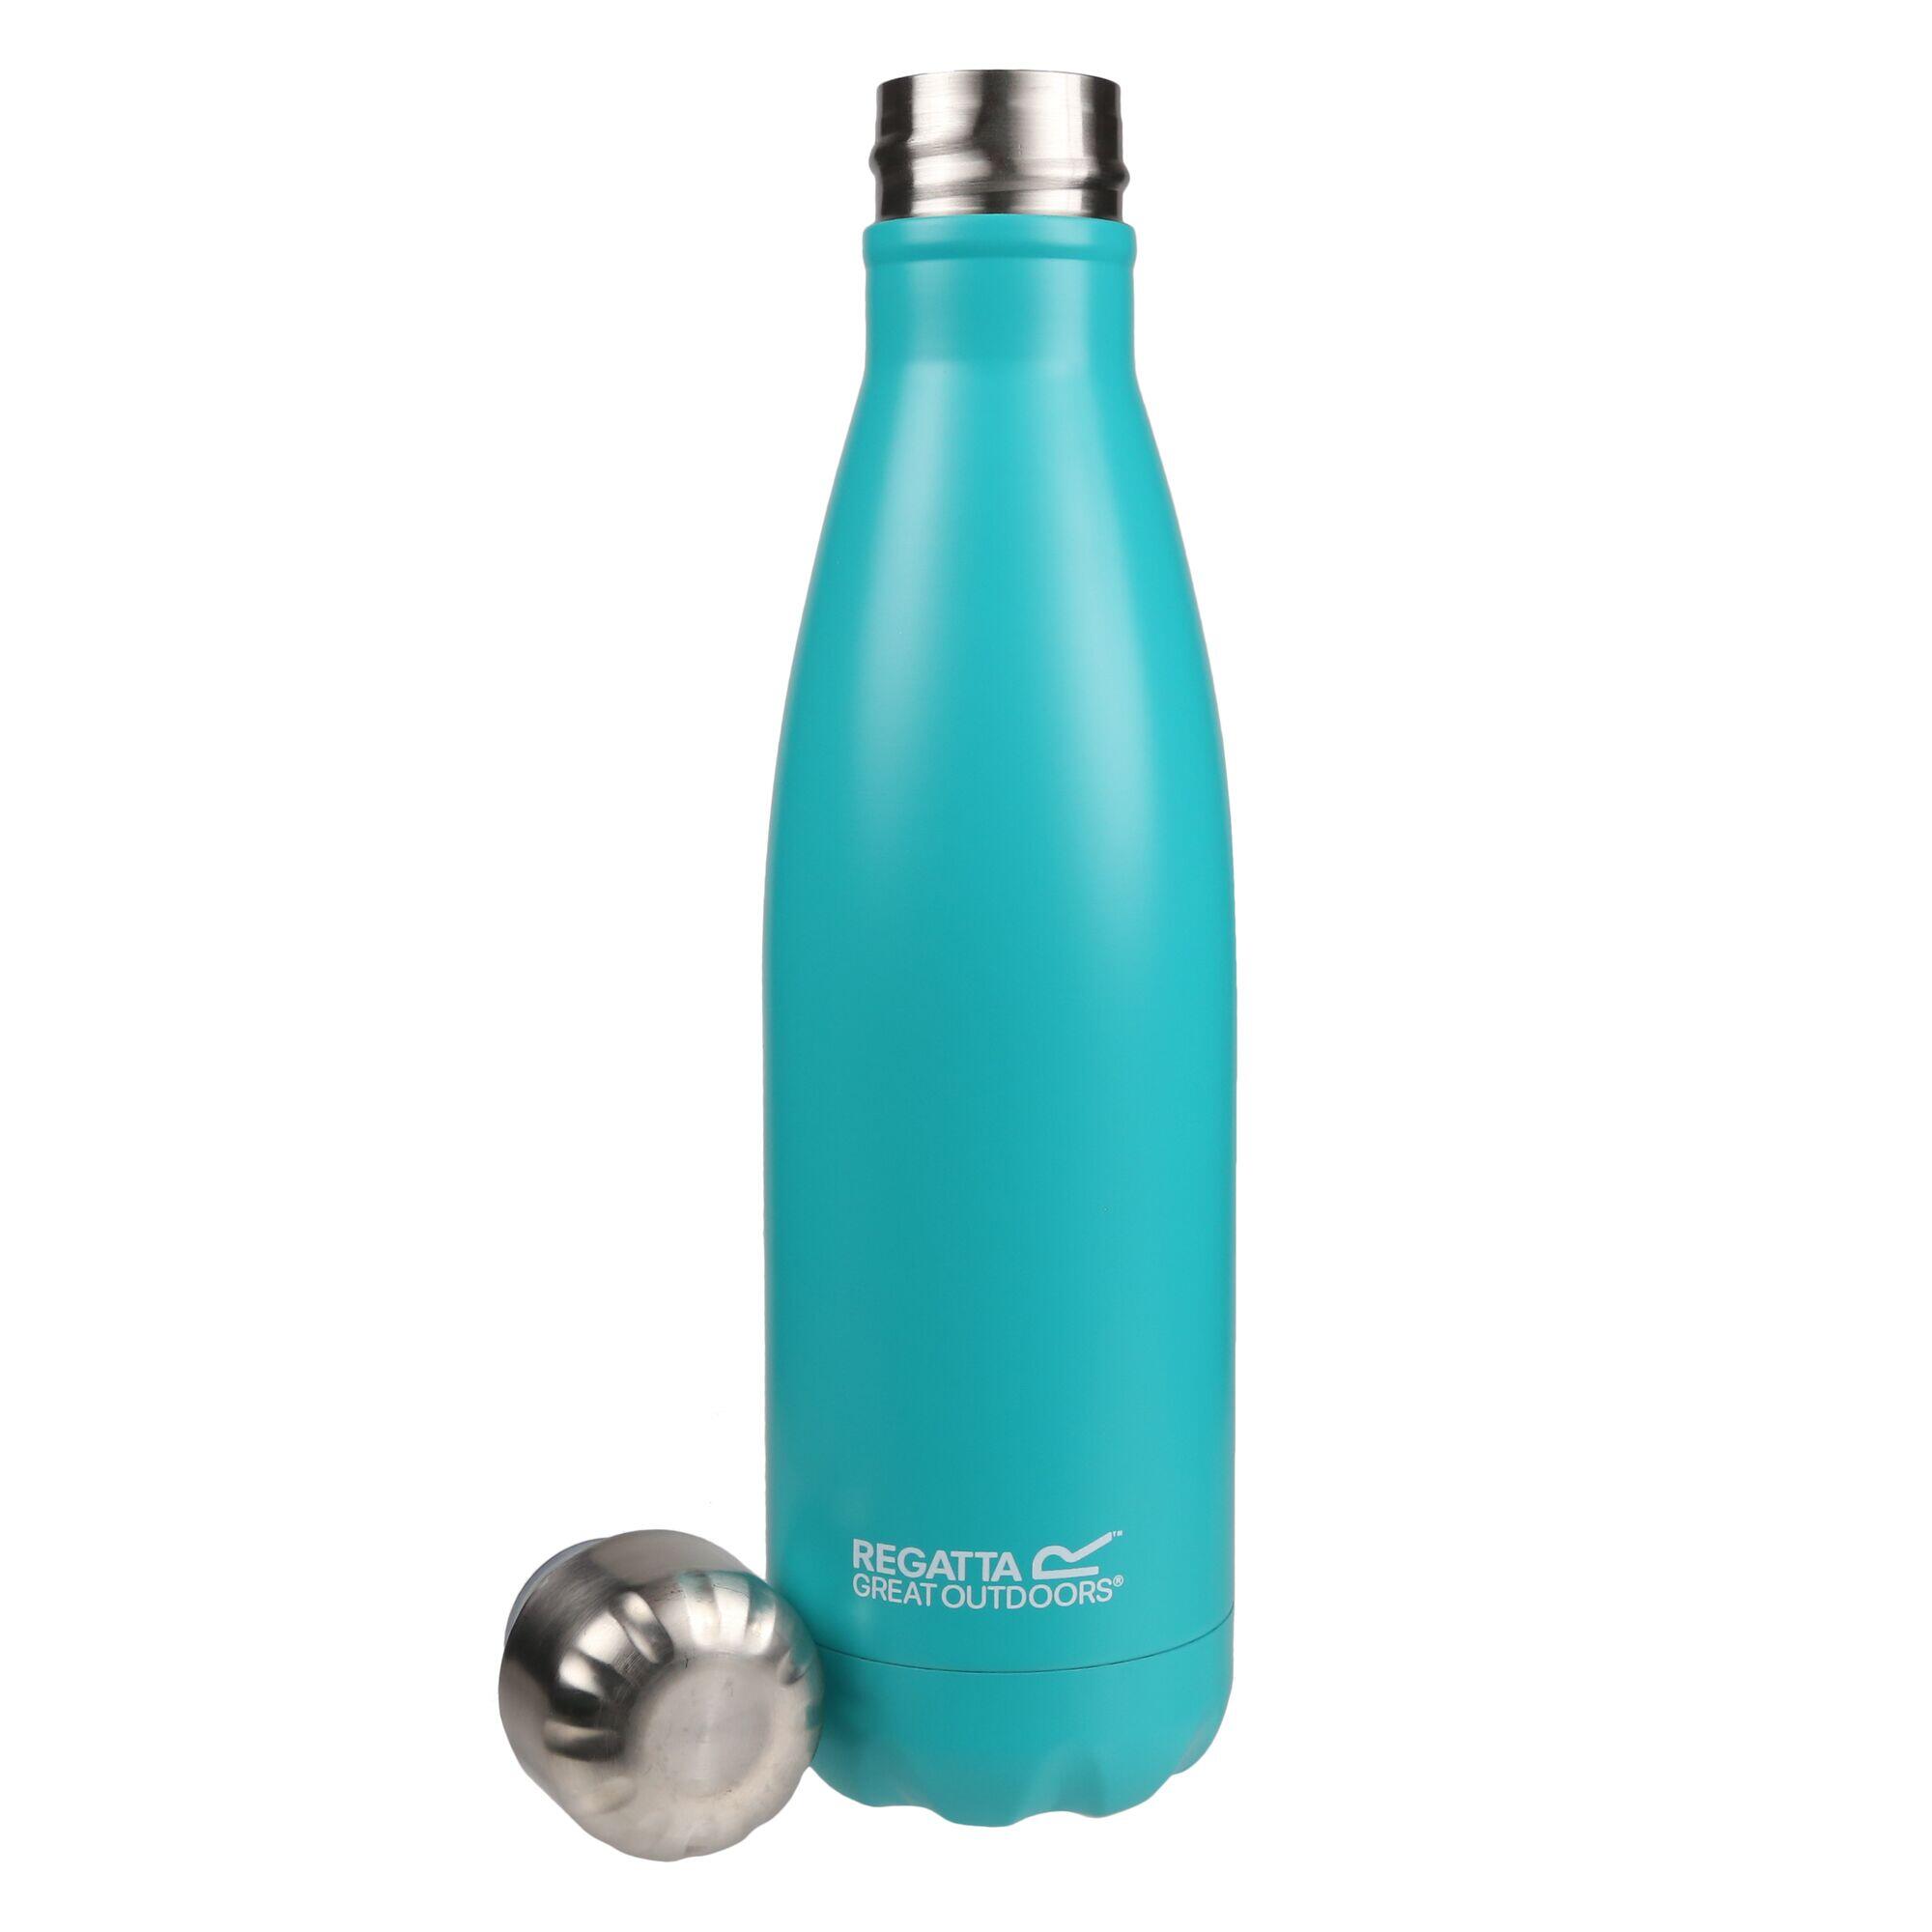 0.5L Adults' Camping Drinking Bottle - Ceramic Blue 4/5